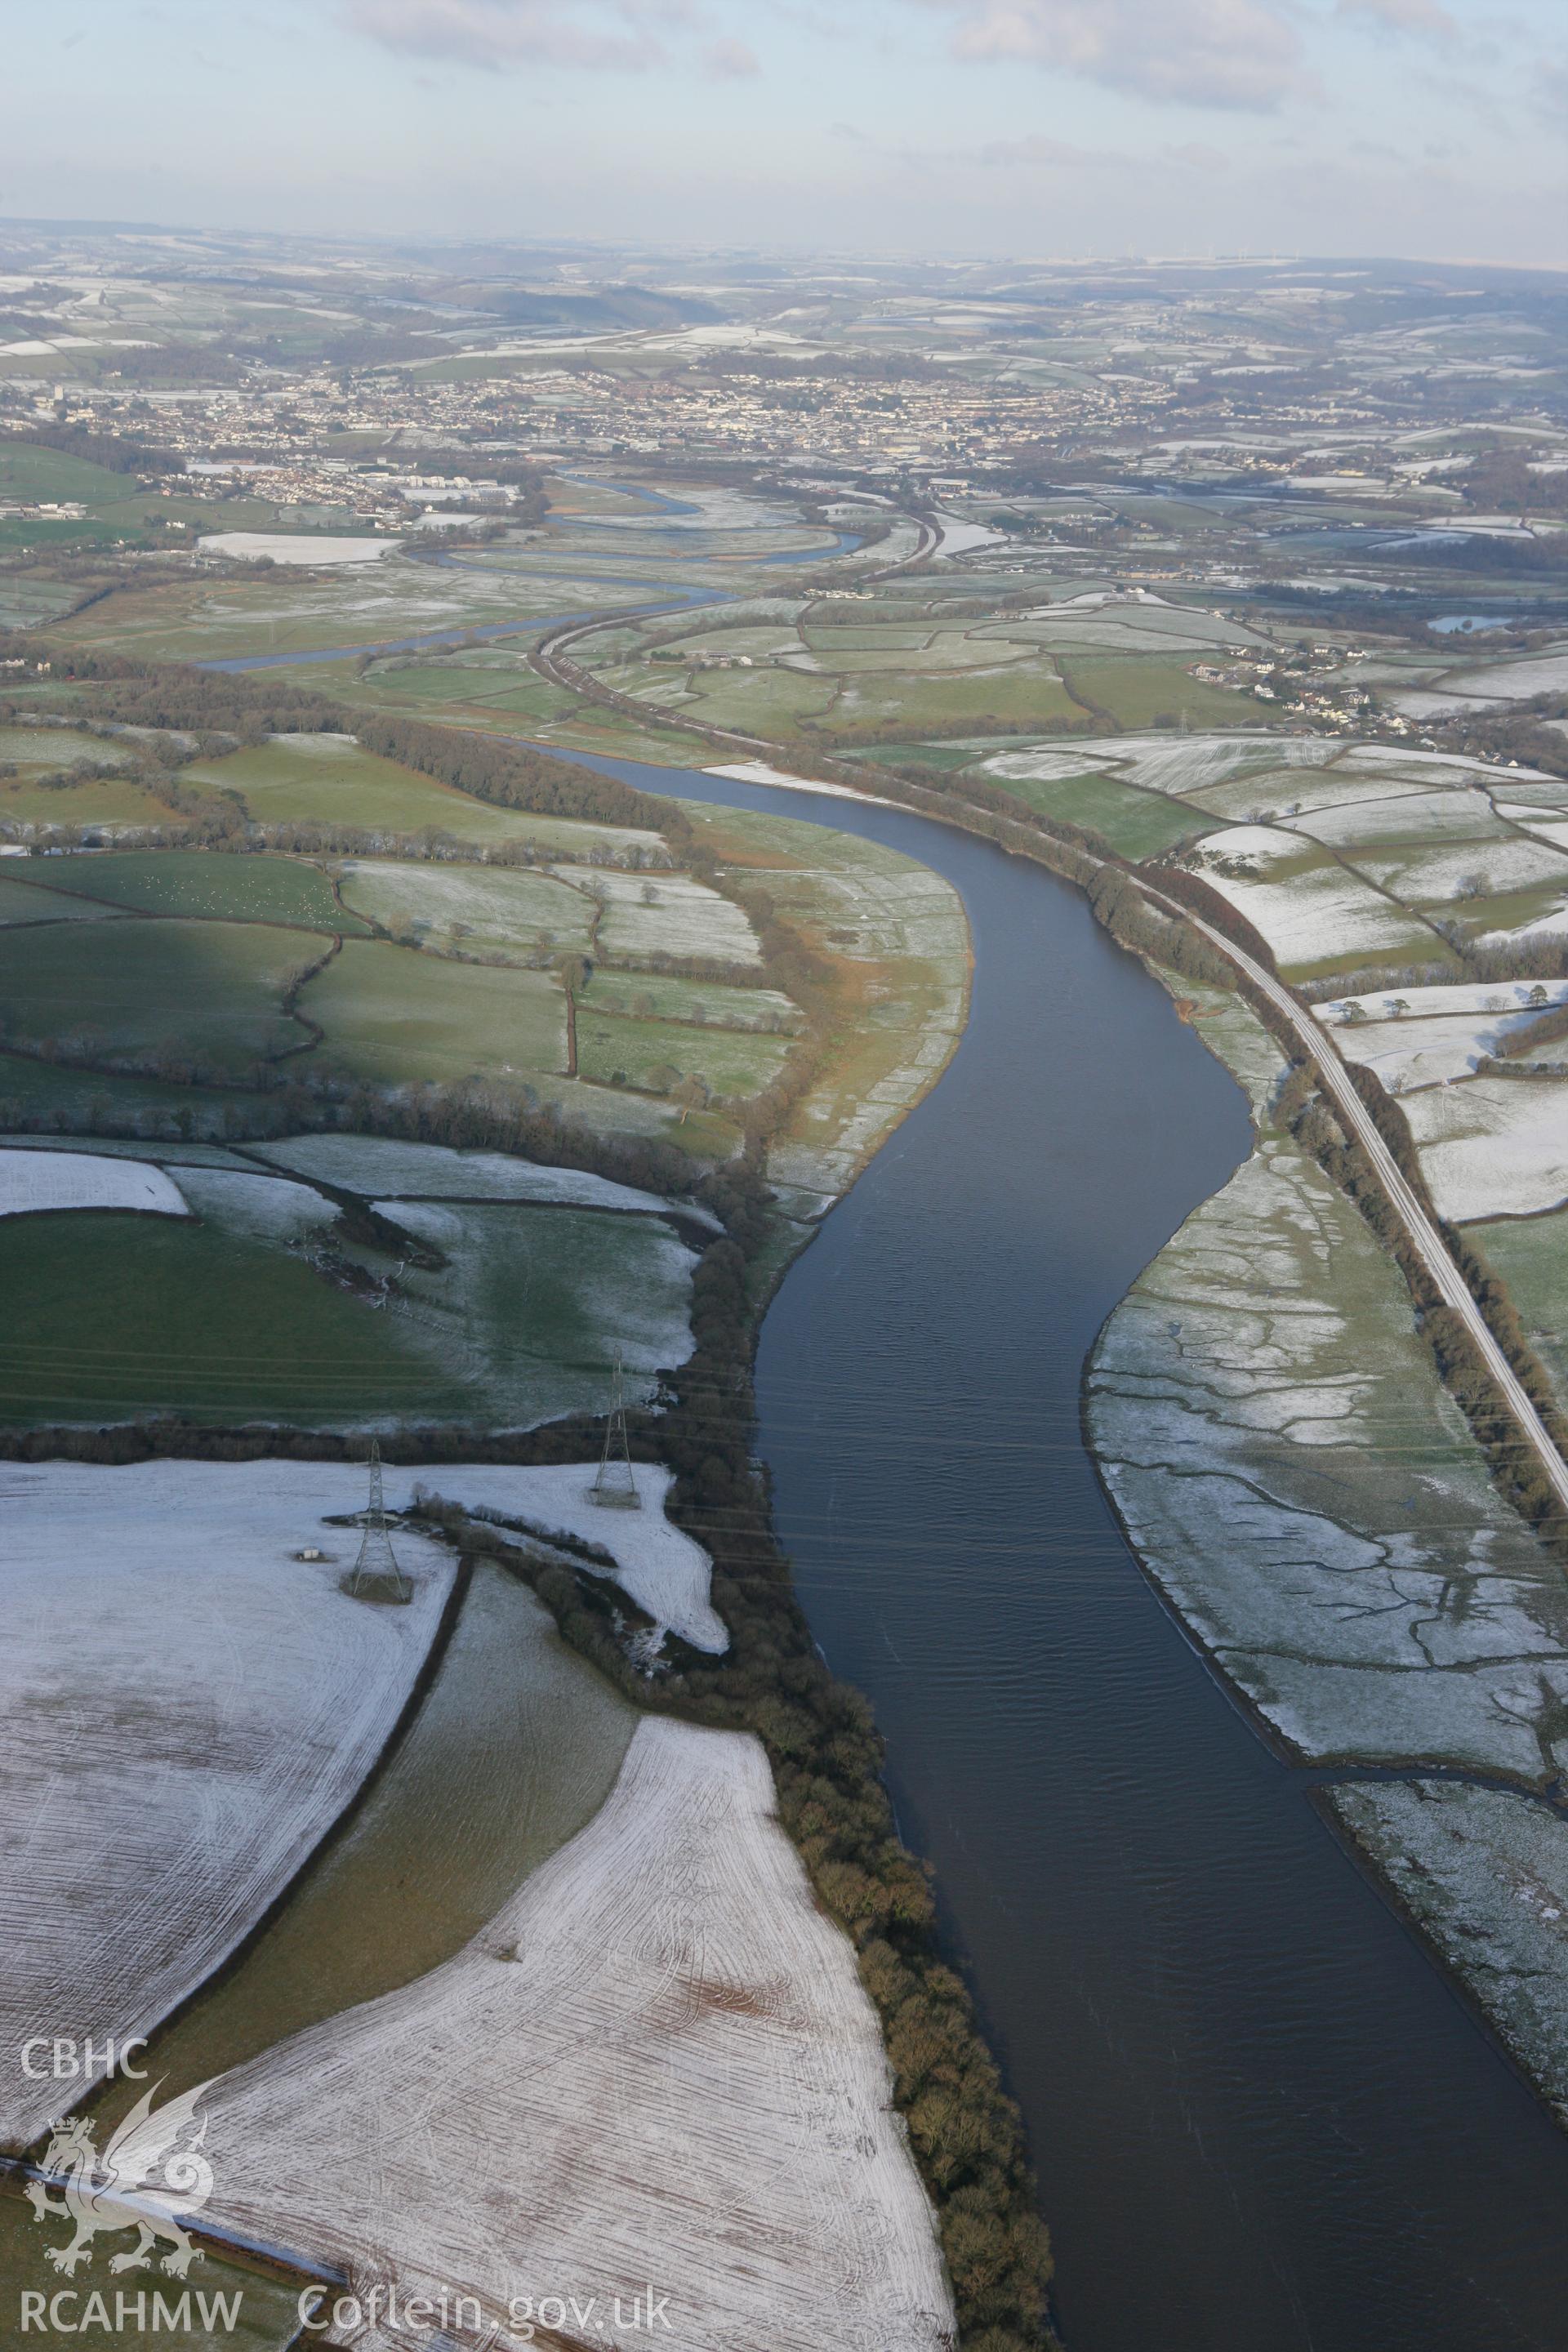 RCAHMW colour oblique photograph of the River Twyi, looking north to Carmarthen. Taken by Toby Driver on 01/12/2010.